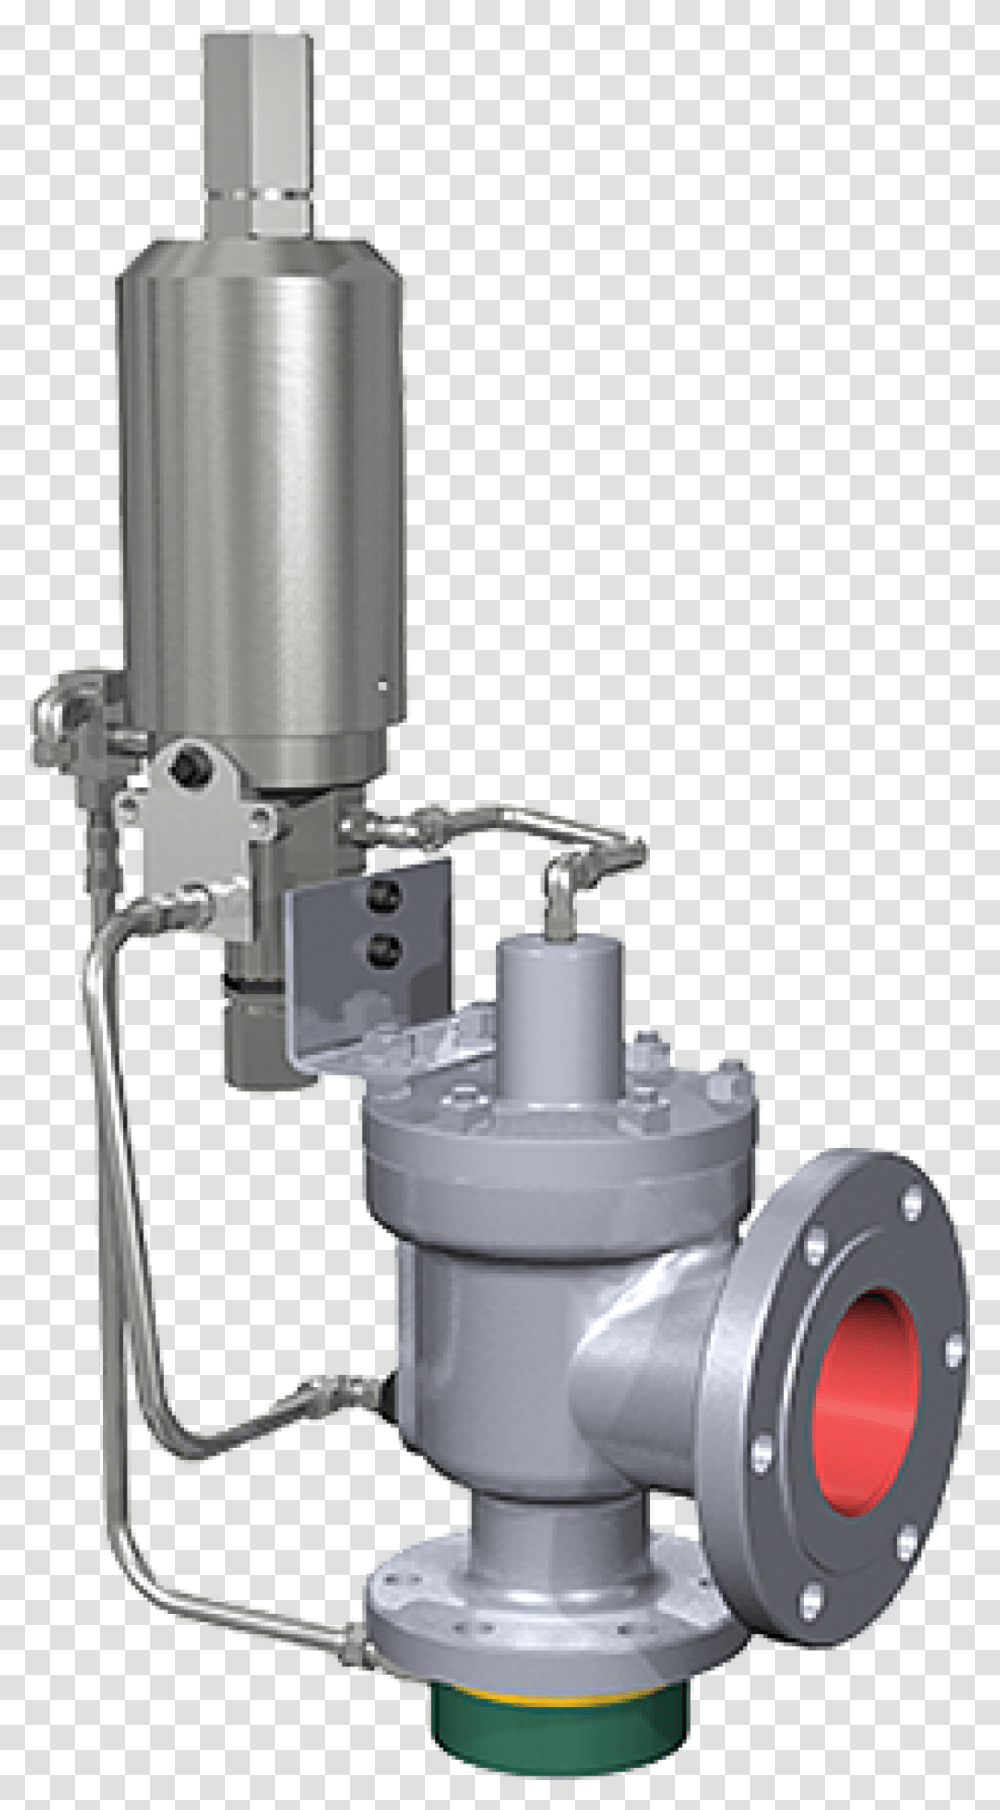 Series Pilot Operated Safety Relief Valve Consolidated Pilot Operated Relief Valves, Machine, Pump, Motor, Mixer Transparent Png